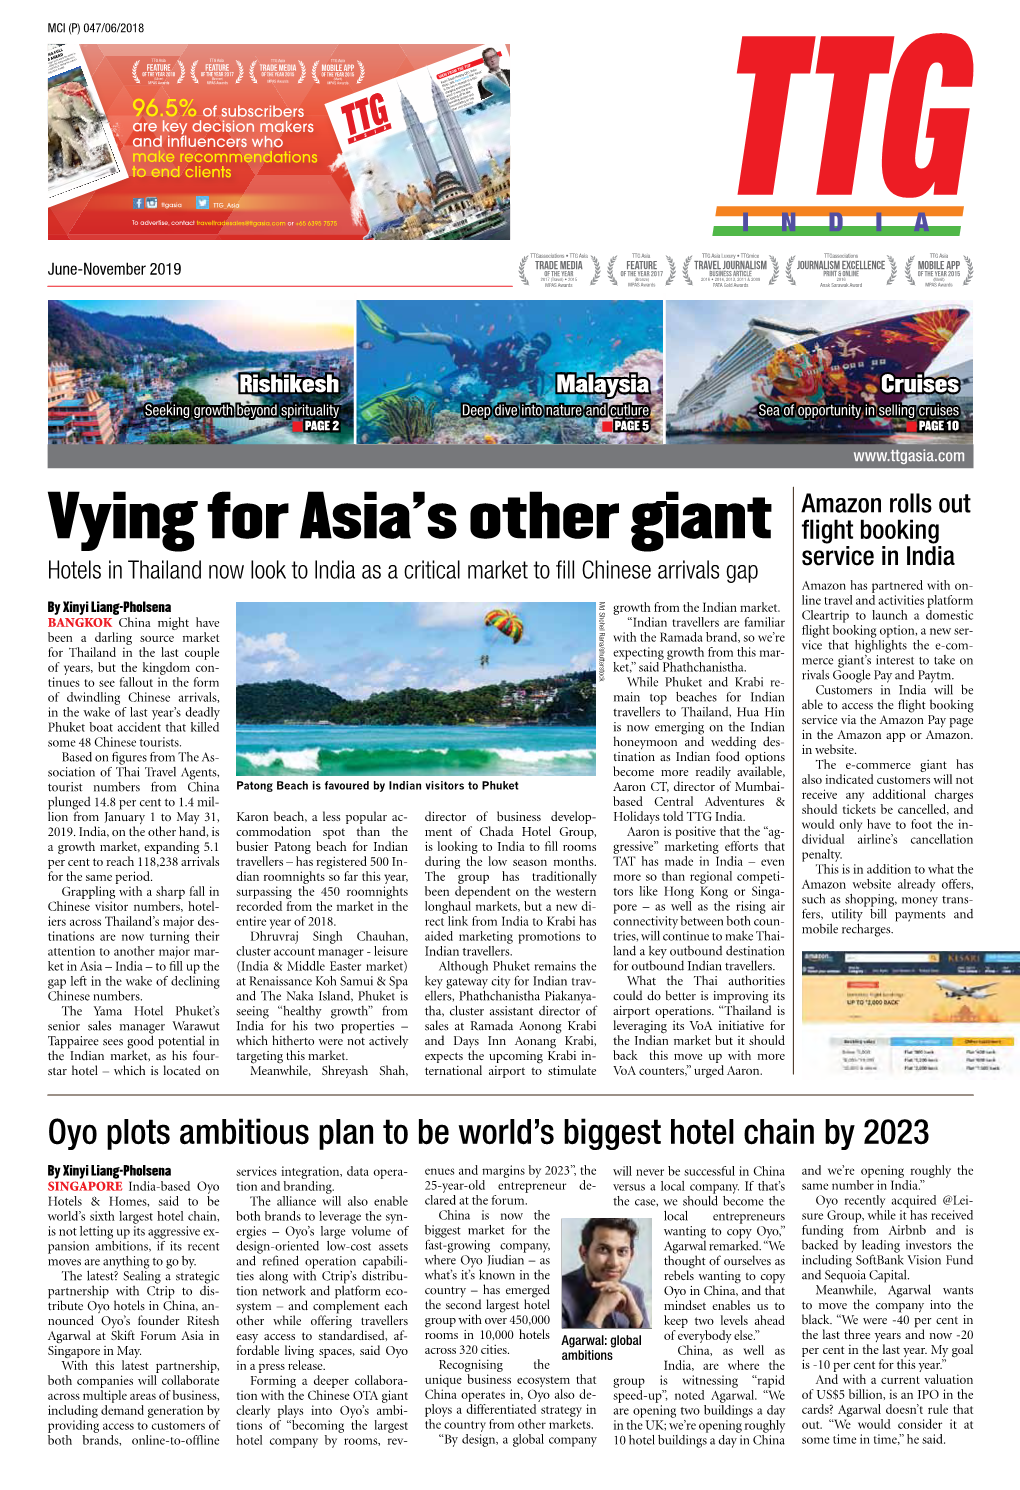 Vying for Asia's Other Giant